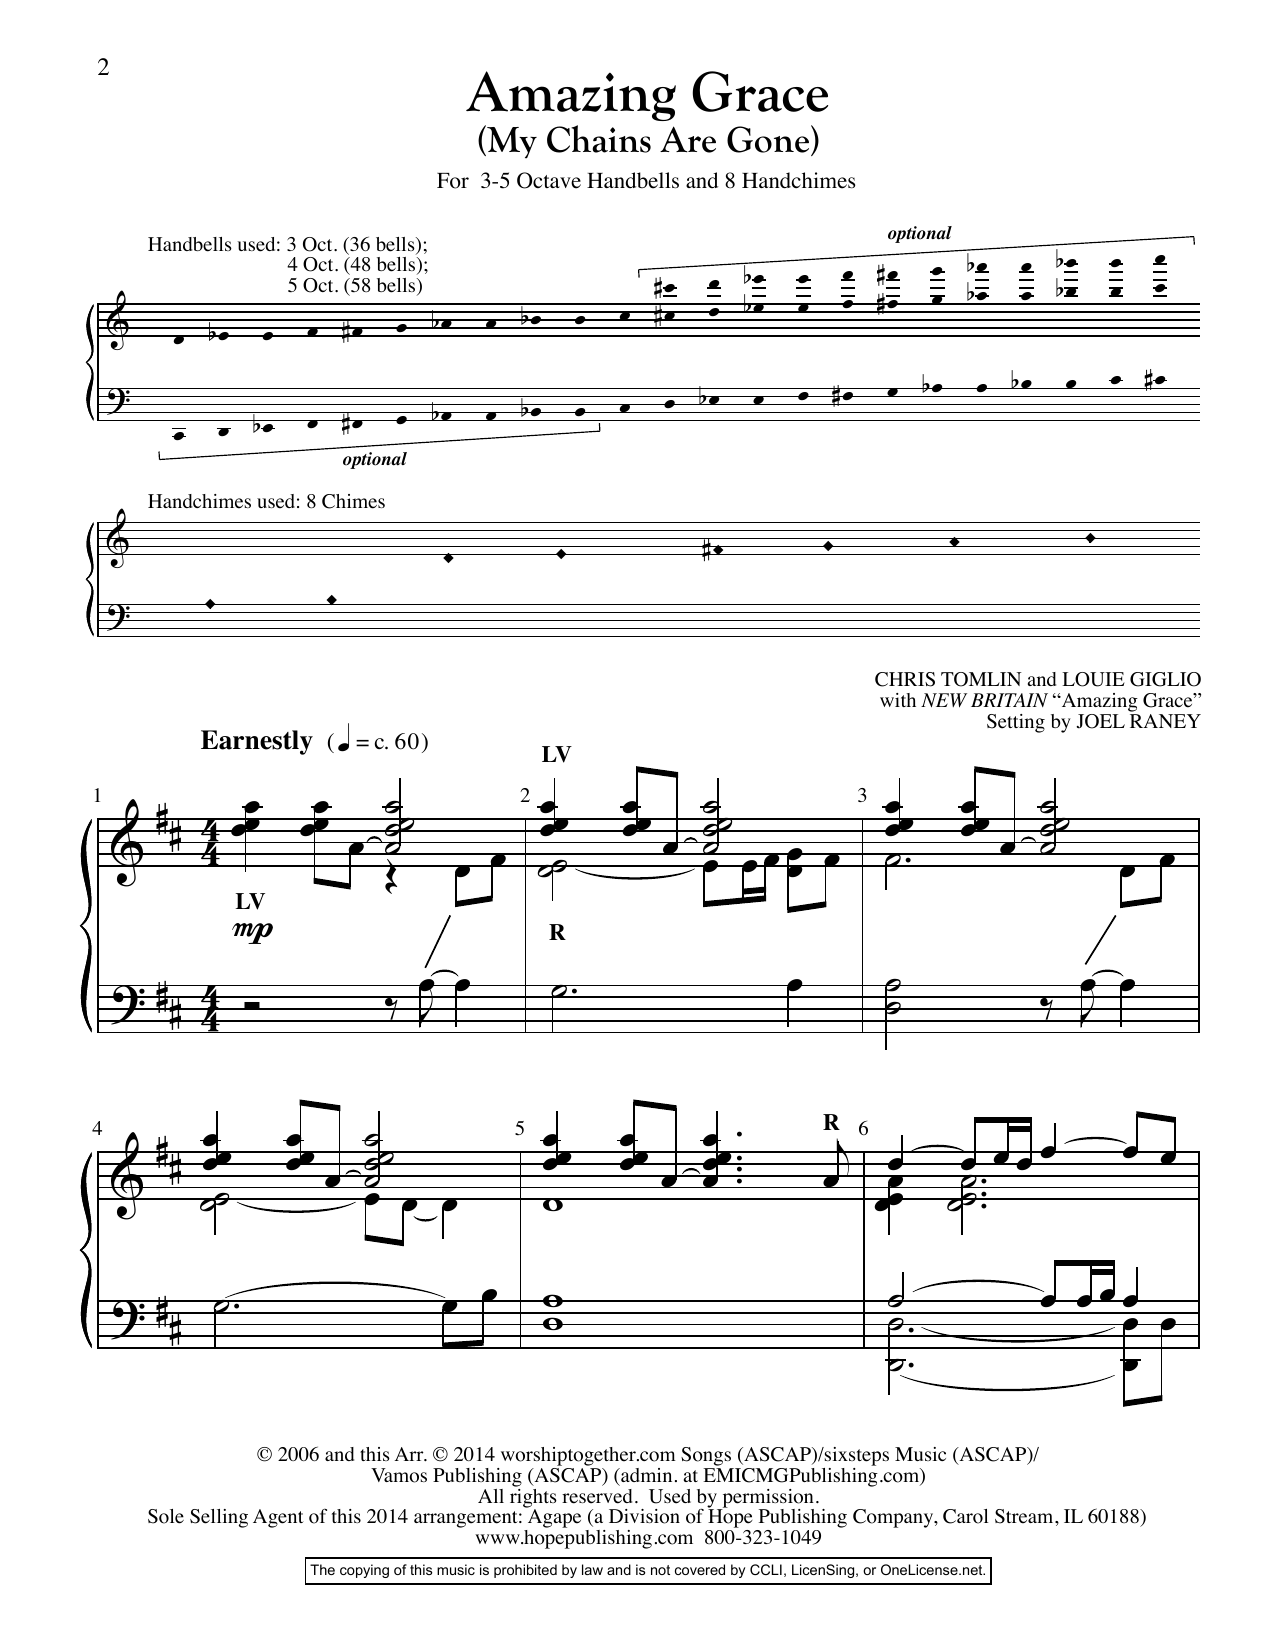 Download Joel Raney Amazing Grace (My Chains Are Gone) - Ha Sheet Music